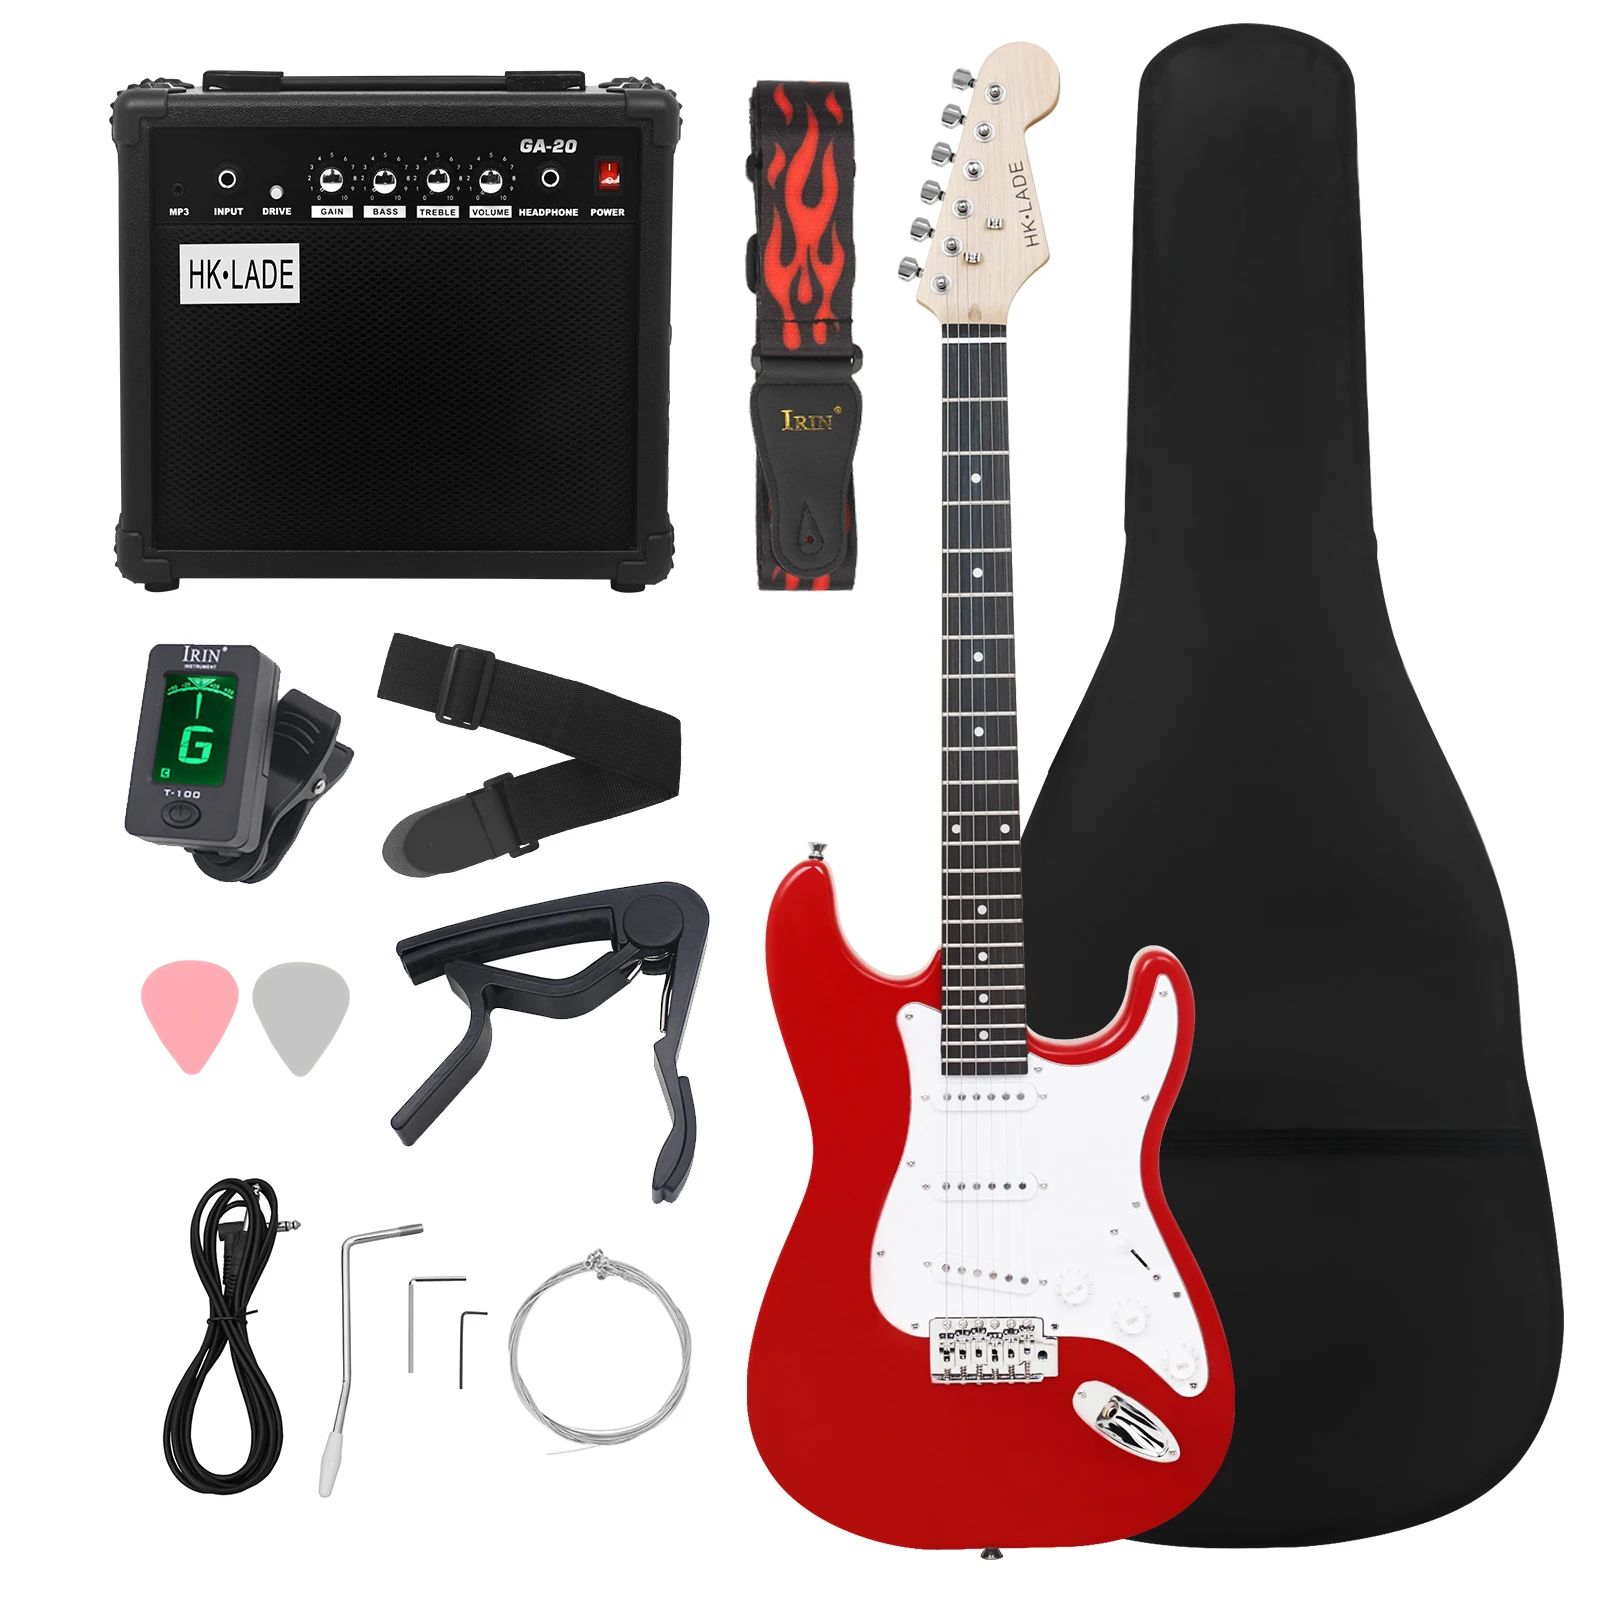 

6 Strings 39 Inch Electric Guitar 22 Frets Maple Body Electric Guitarra With Bag Amp Strap Picks Guitar Parts & Accessories